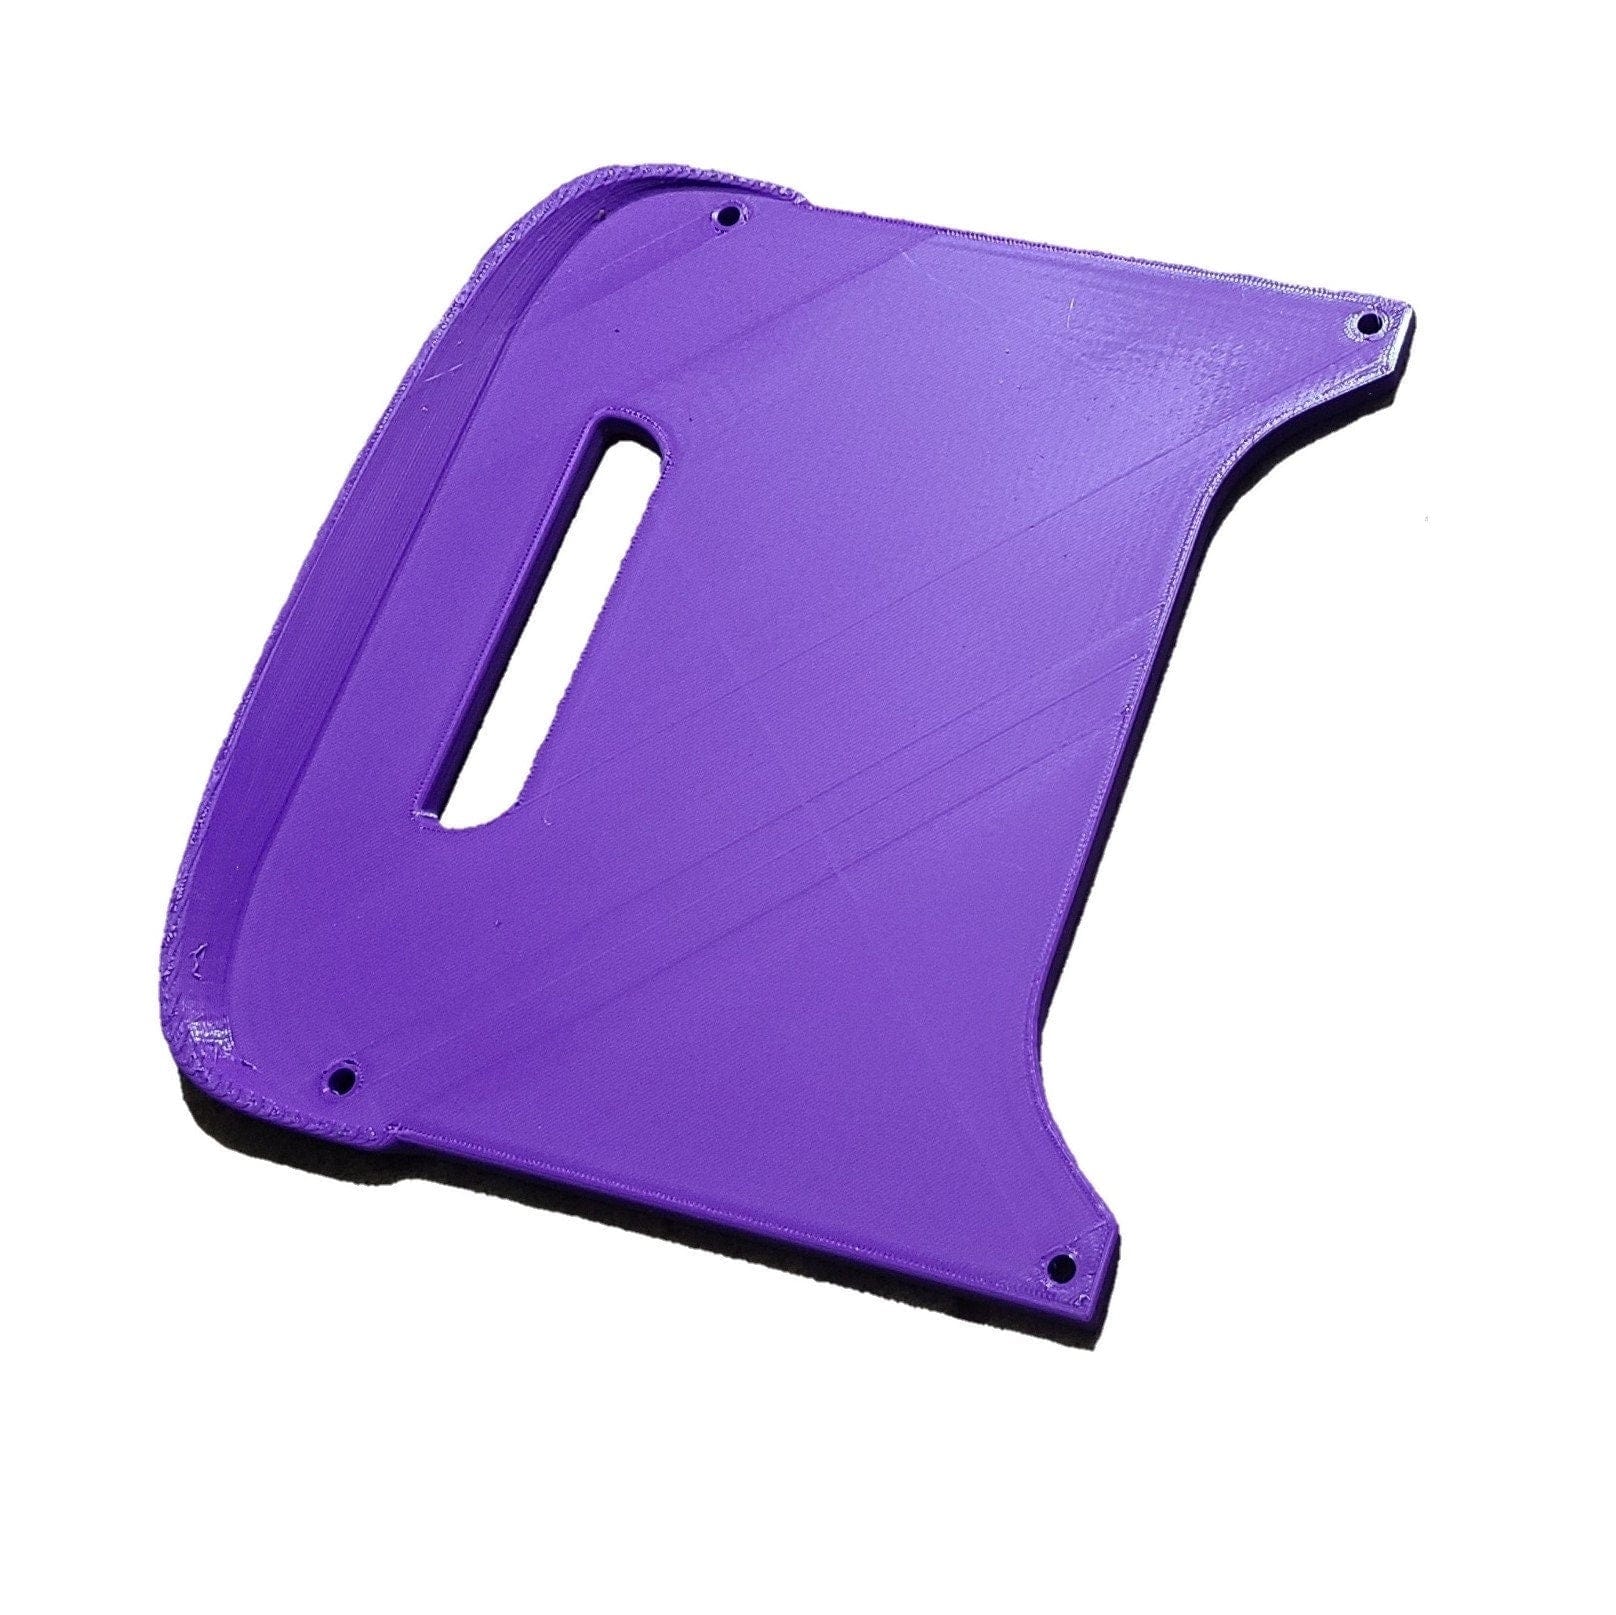 Skid Plate For Onewheel Pint X (Original Pint Bumper Compatible version) | Front Plate Only